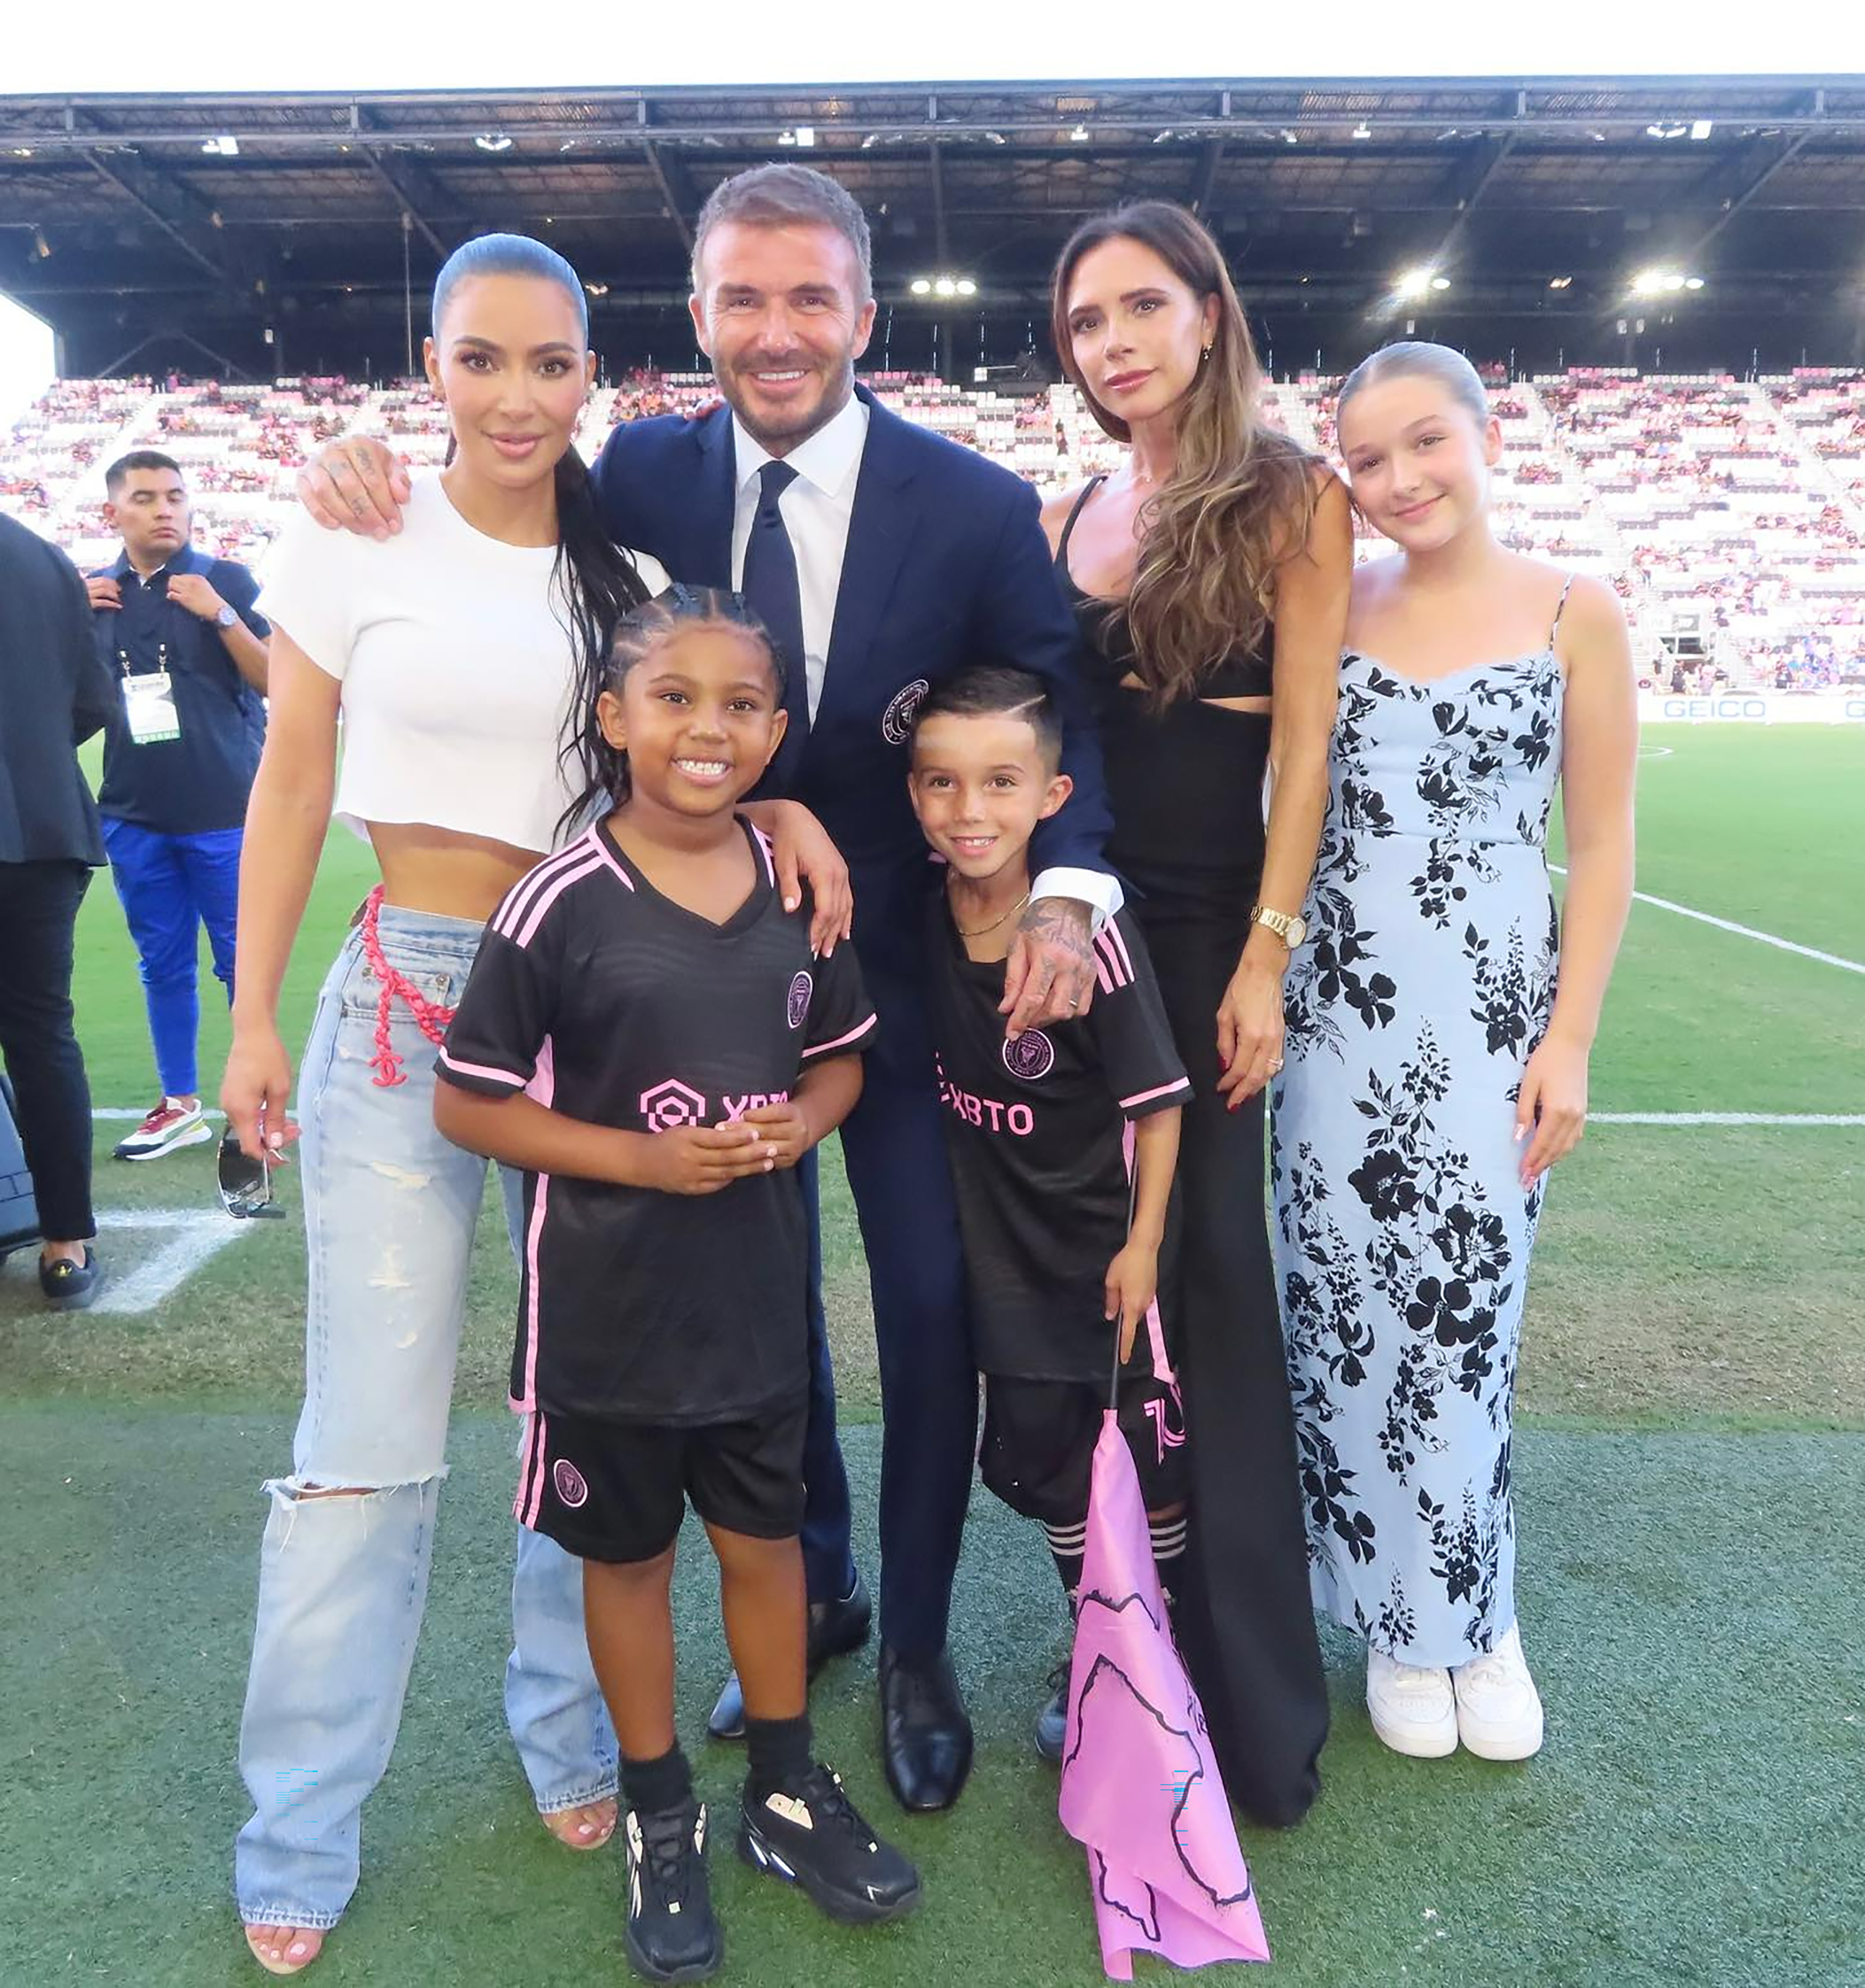 Kim and Saint pictured with David and Victoria Beckham